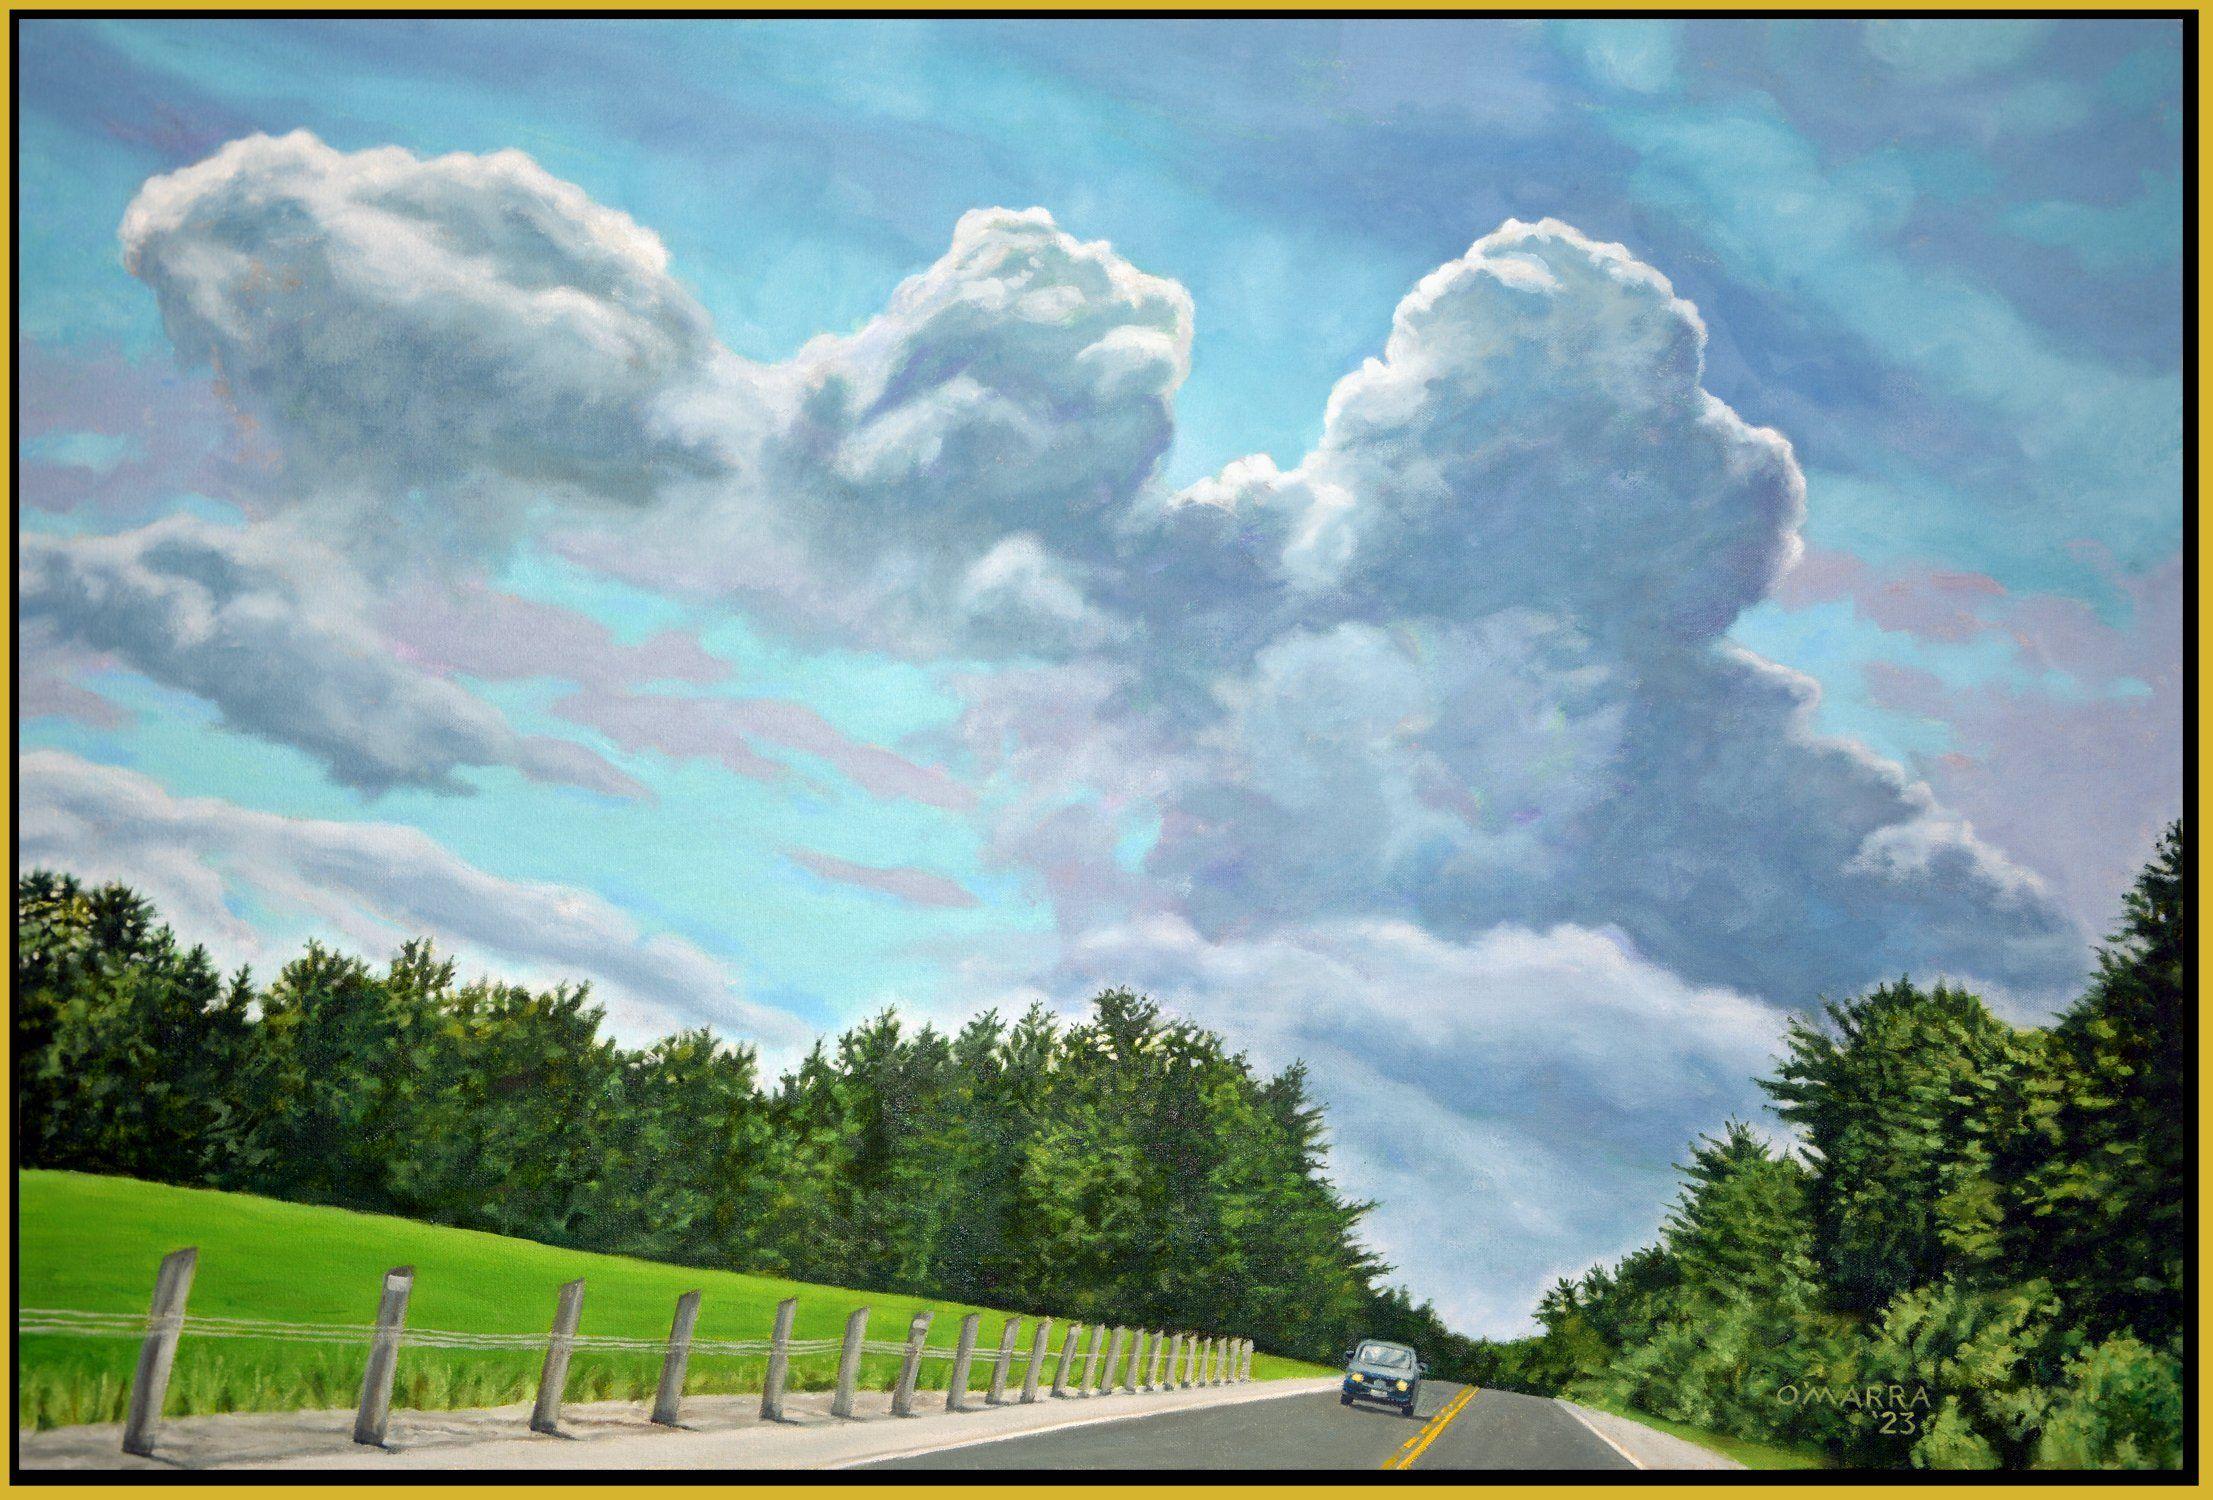 This is a view while travelling down a highway in central Ontario, Canada, 45 kilometers south of where I live near the town of Bancroft. I loved the cloud structure and captured the reference I used with a slight right-side slant to increase the